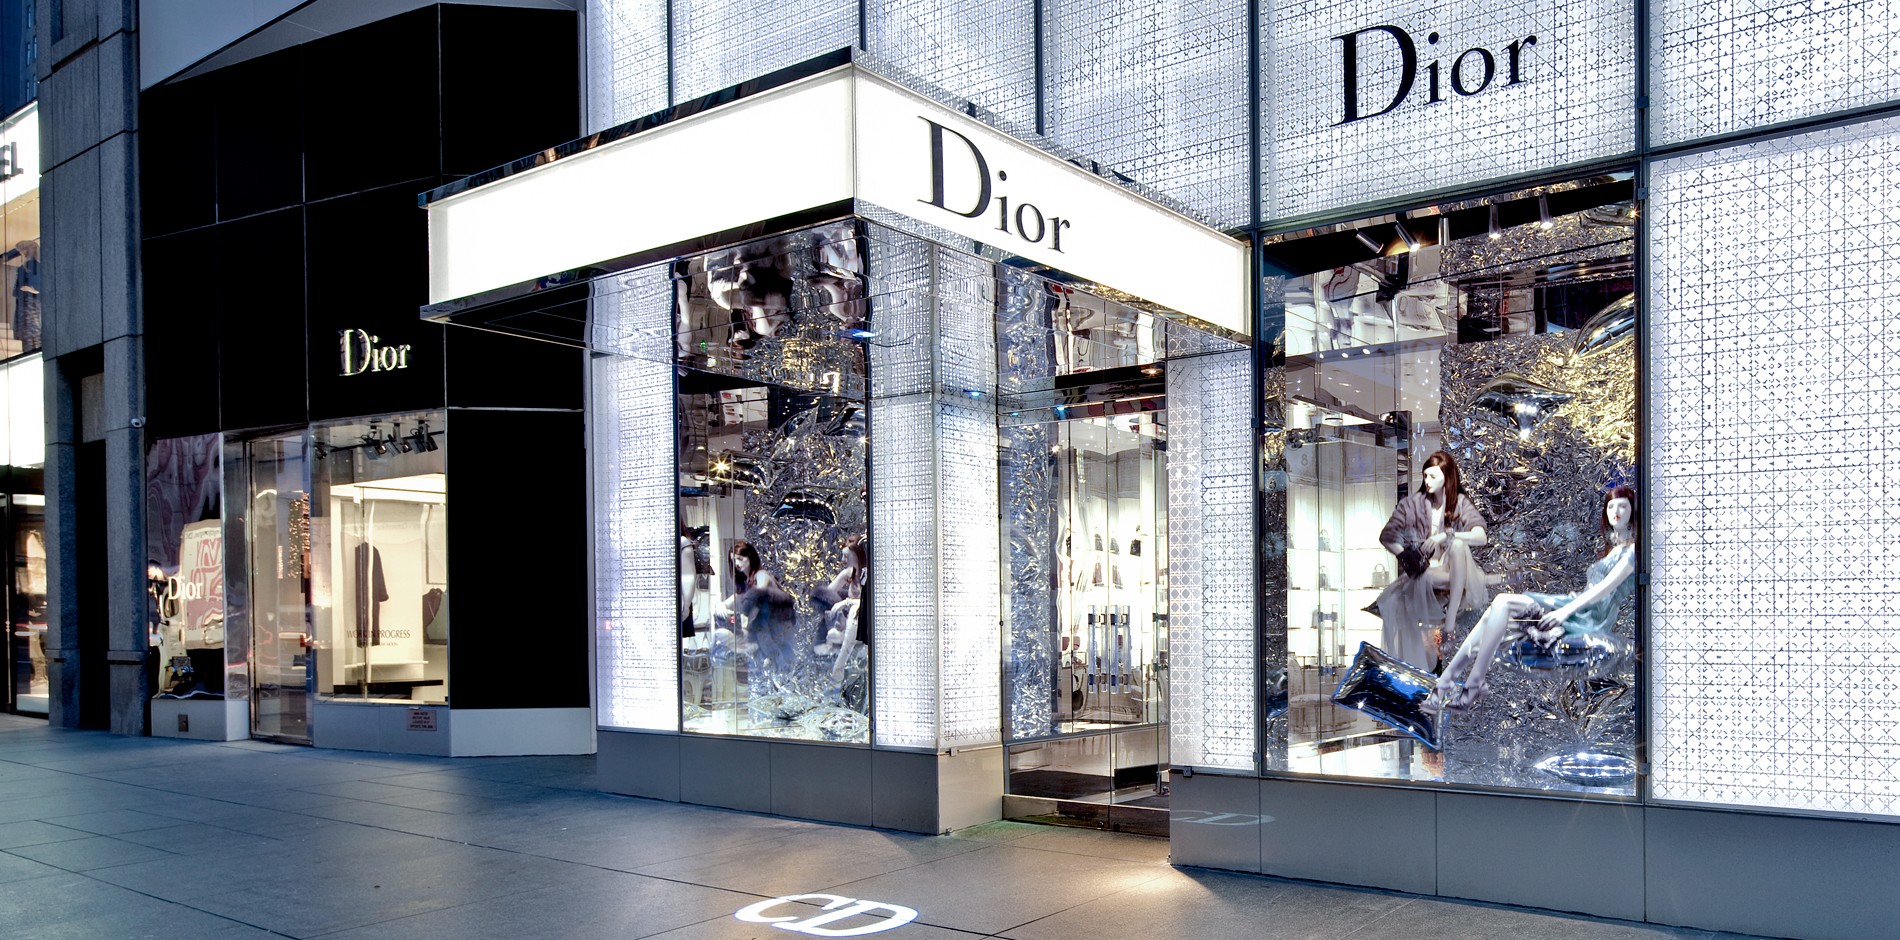 The Christian Dior store on East 57th street off of Fifth Avenue in New  York on Sunday, February 27, 2011. LVMH Moet Hennessy Louis Vuitton  announced that they will take over Christian